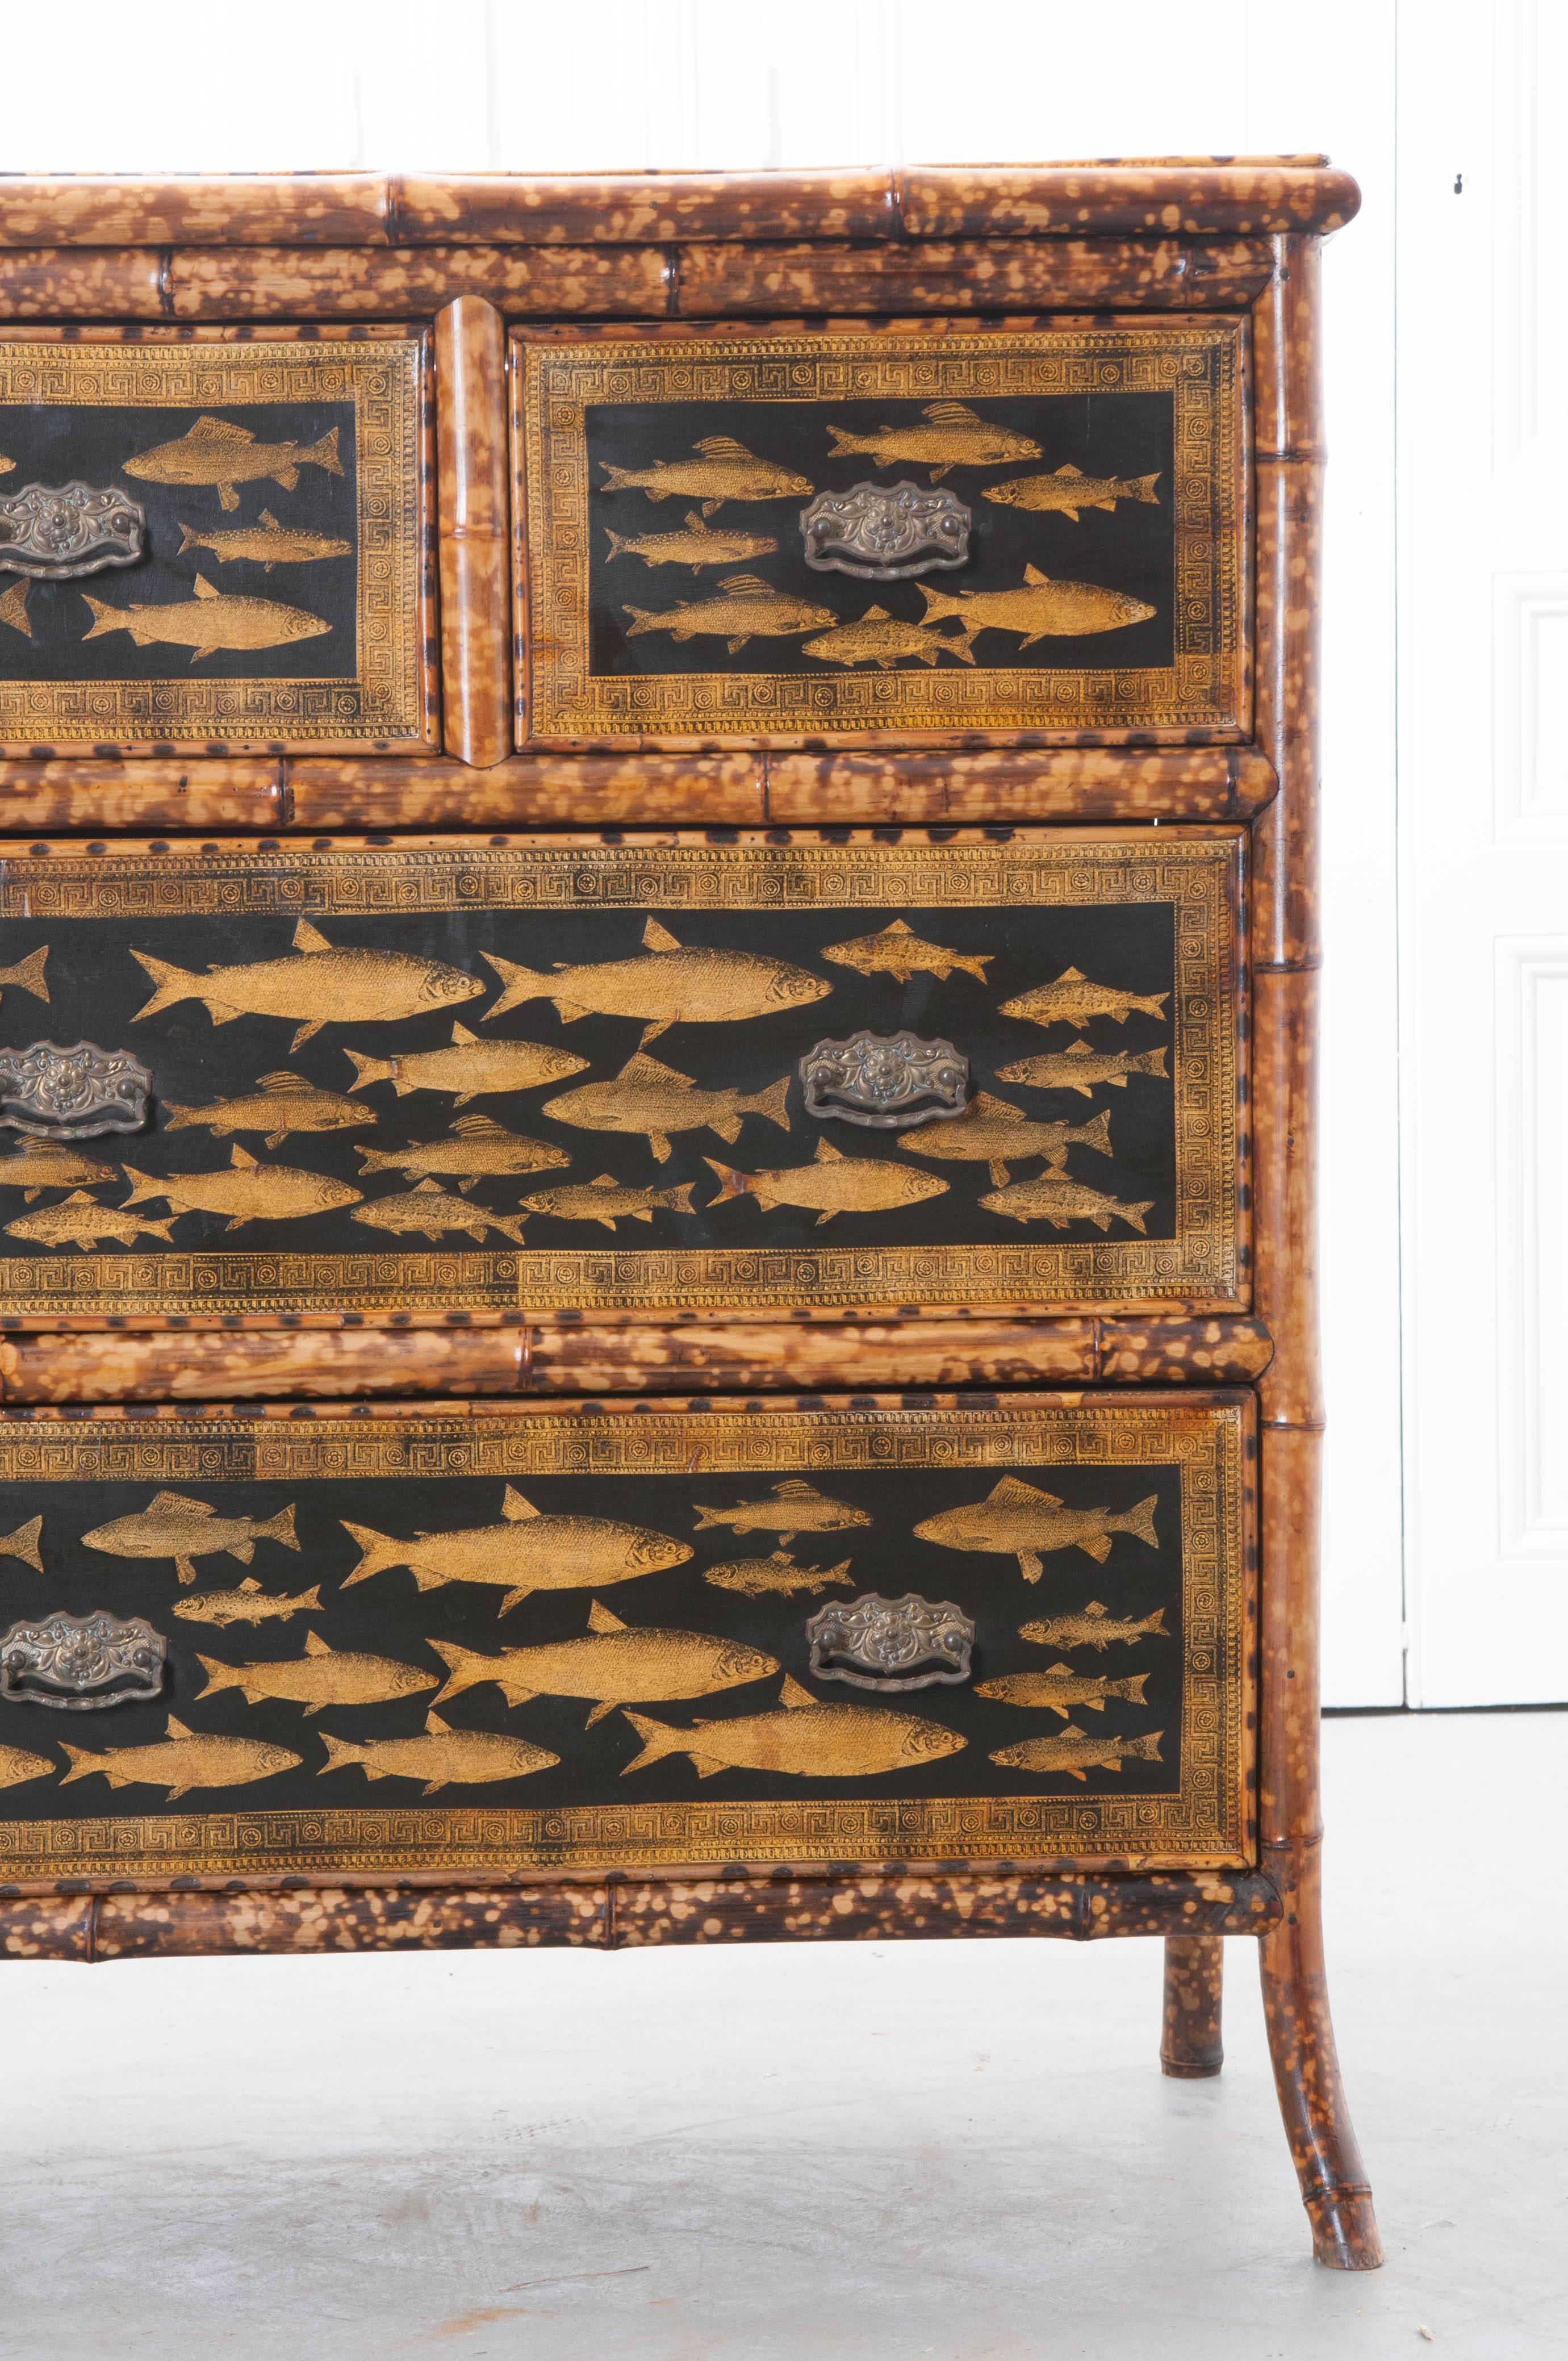 This great little Victorian bamboo four-drawer chest of drawers comes to us from 19th century, England. The antique chest has been more recently decoupaged with a wonderful collection of gold colored fish. In addition to decoupaged fish, the drawer